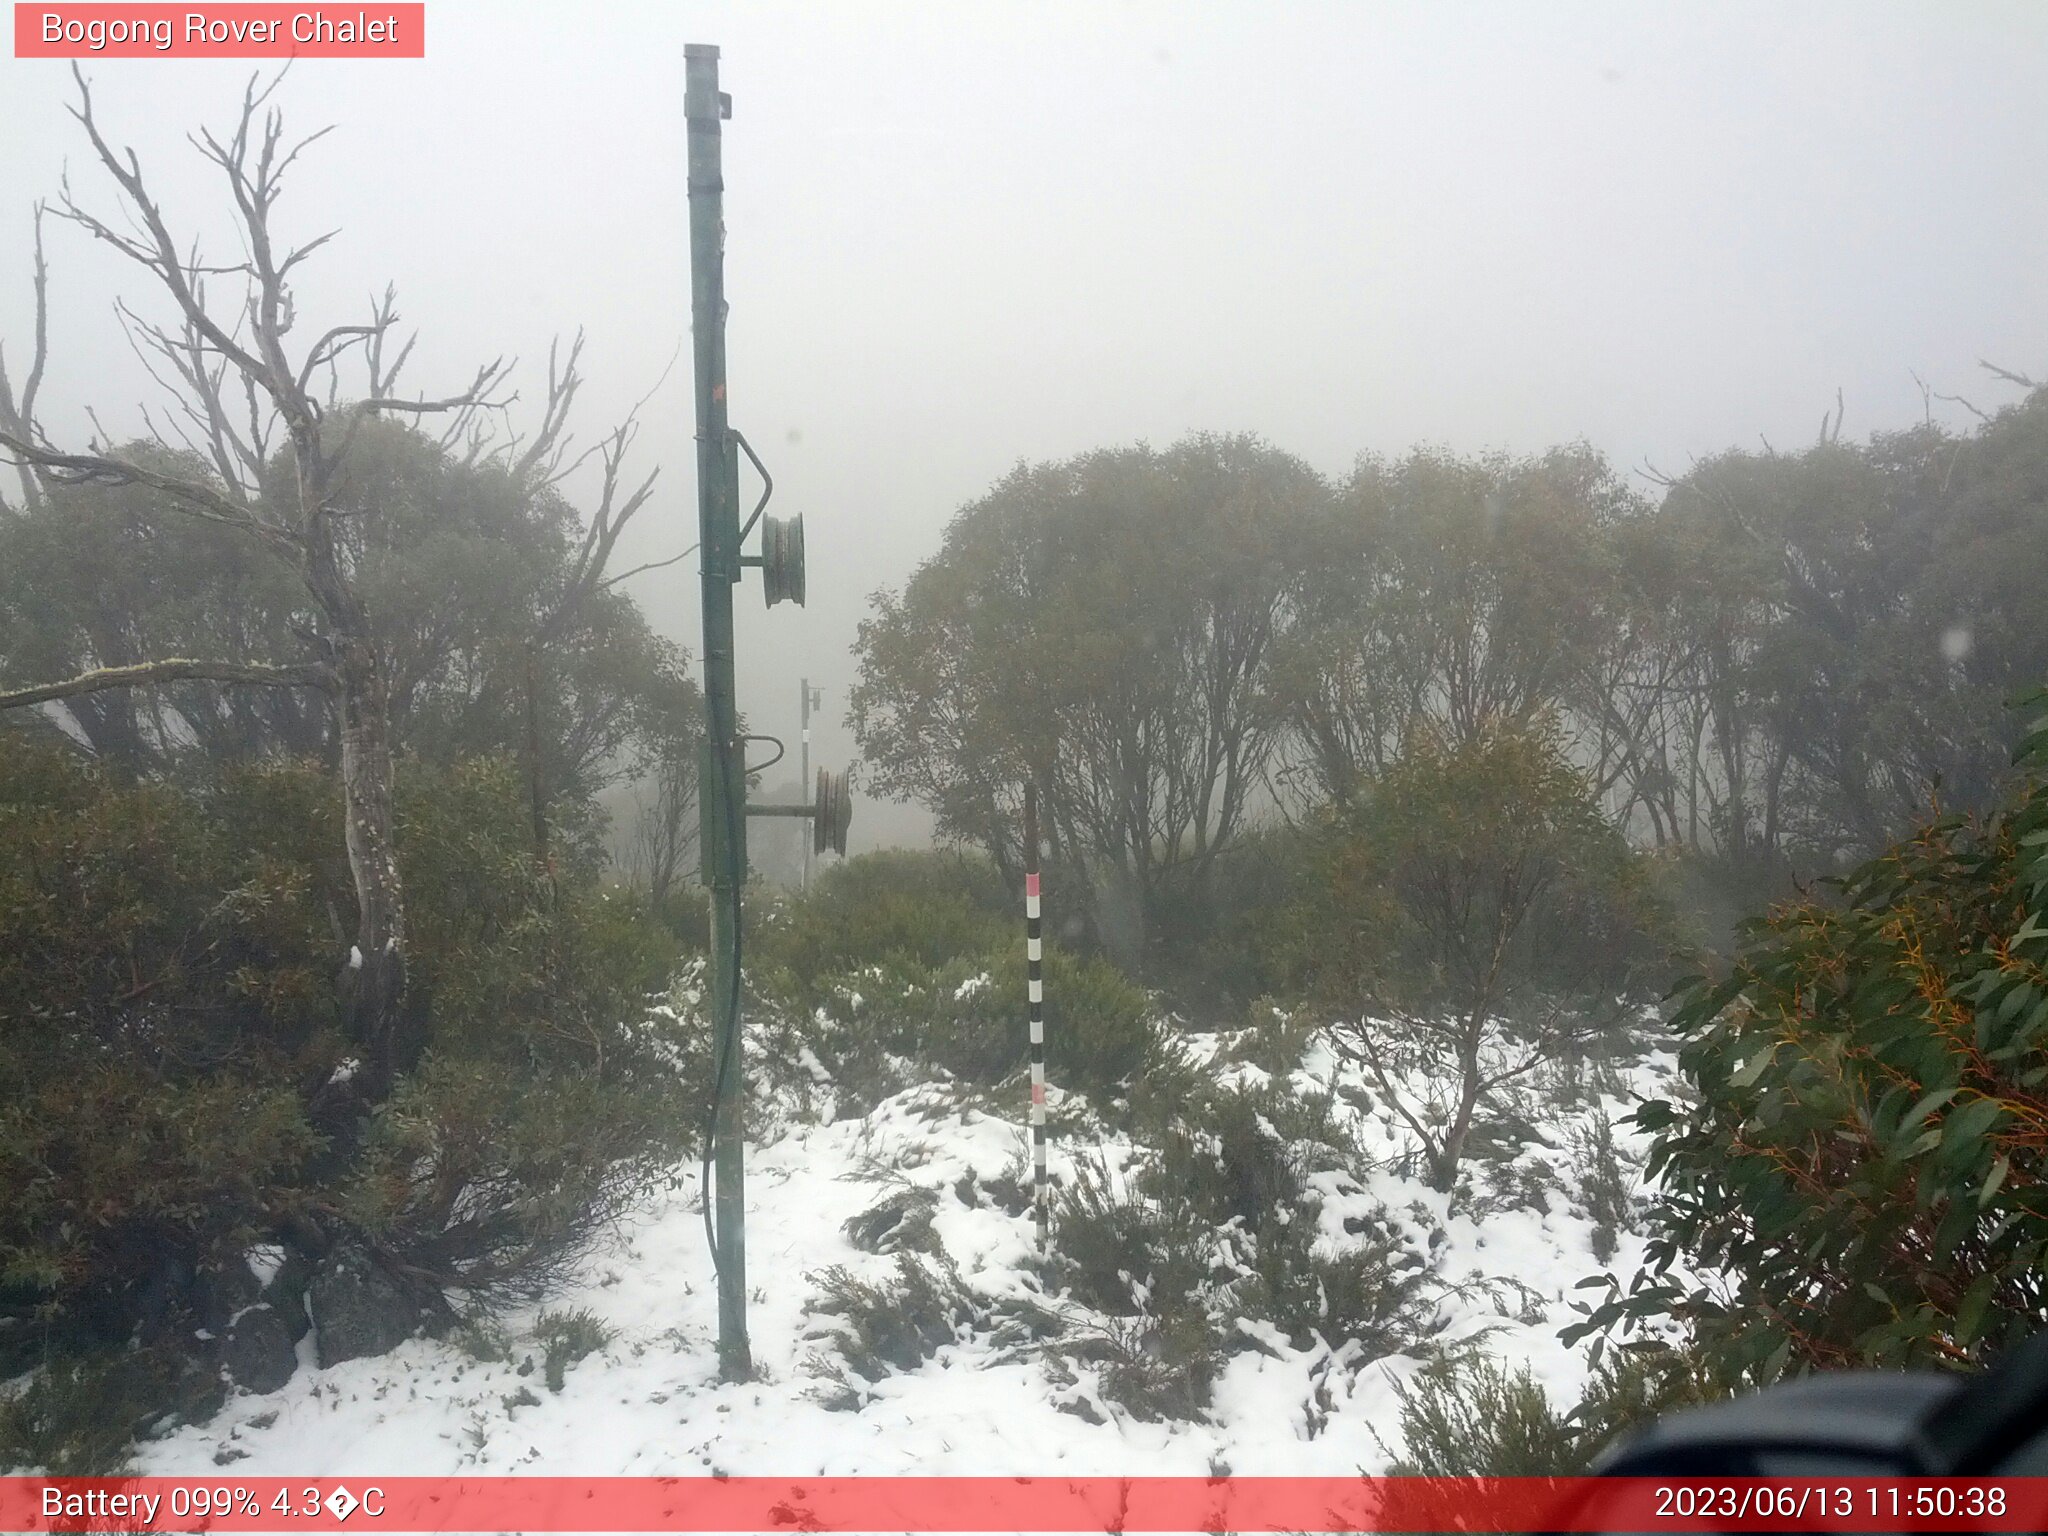 Bogong Web Cam 11:50am Tuesday 13th of June 2023